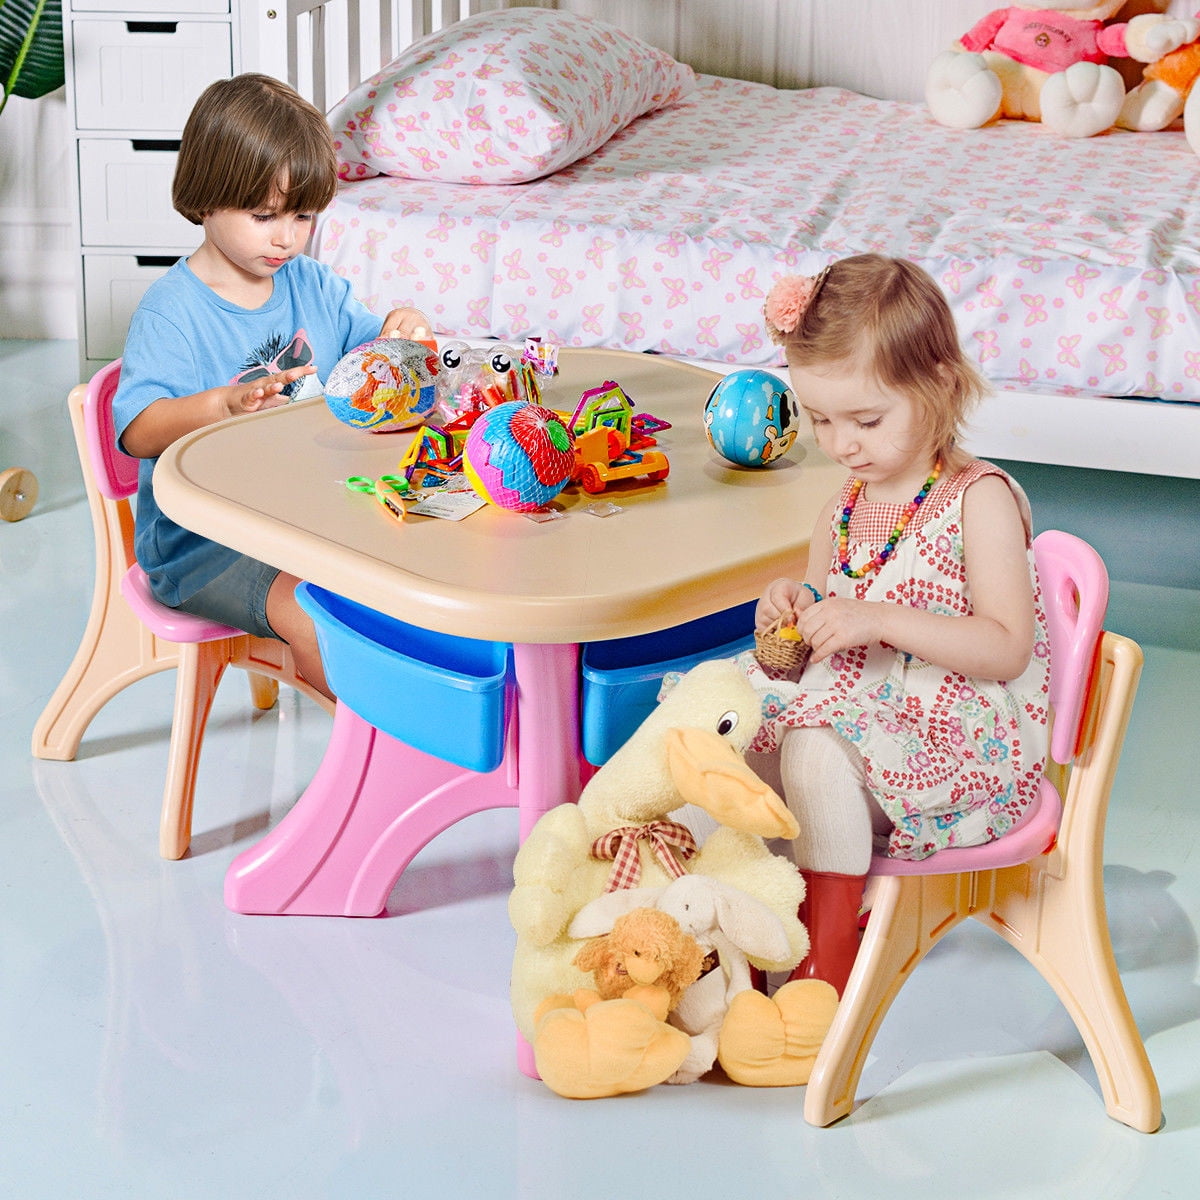 Drawing Projector Table for Kids, Trace and Draw Projector Toy with Light &  Music, Educational Early Learning Projection Drawing Table, Graffiti